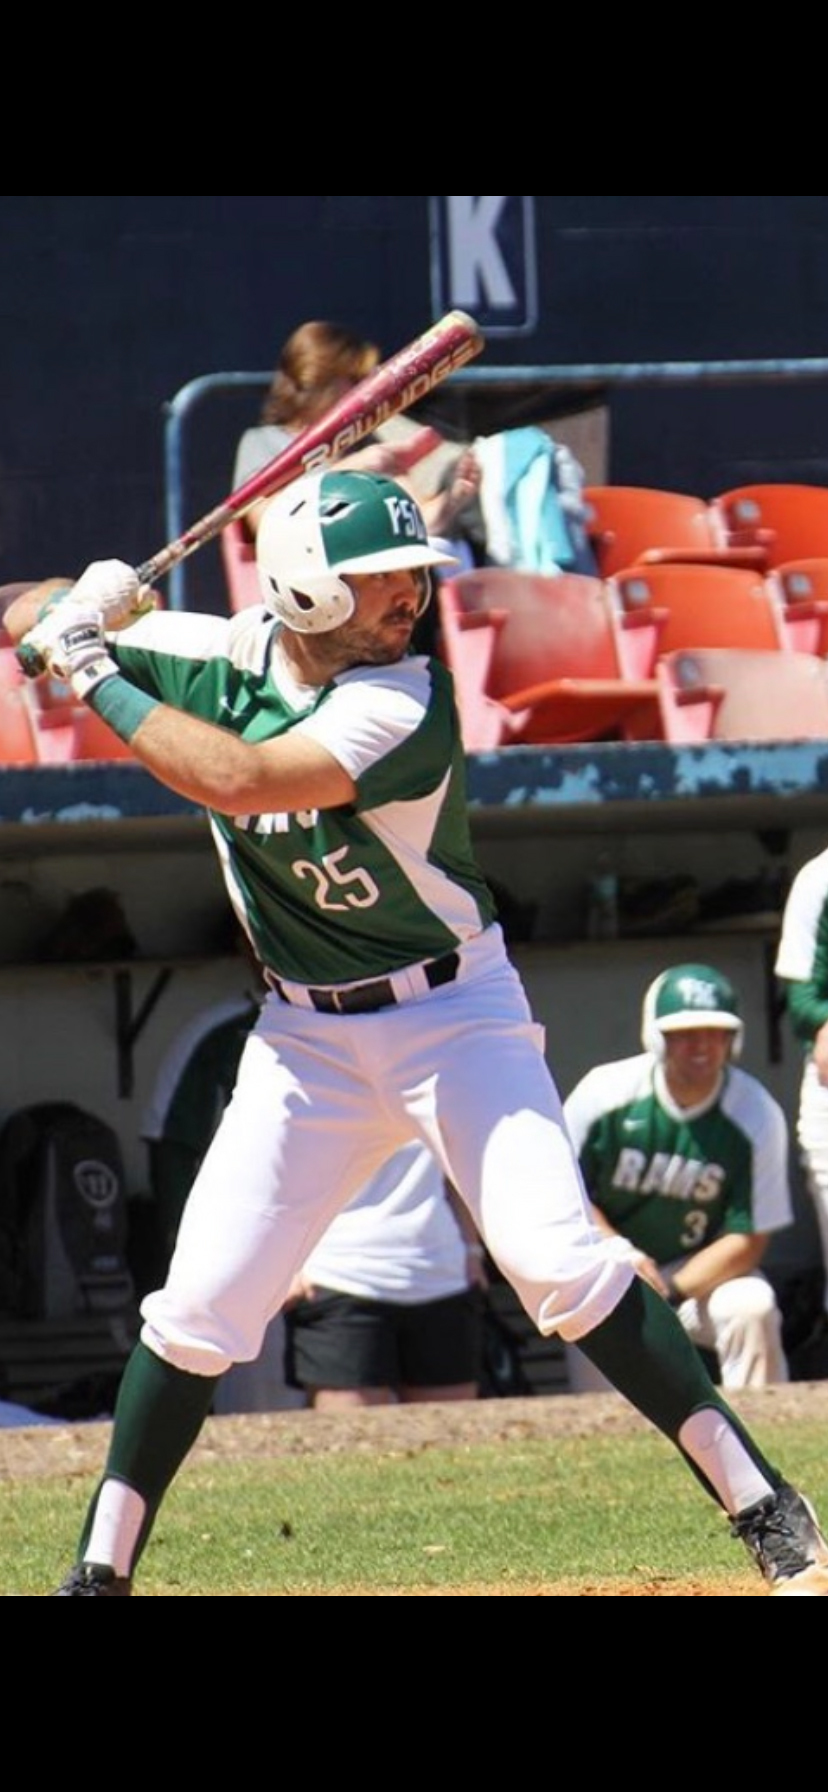 Ernie Geraci, former Westhampton Beach High School and Westhampton Aviators baseball player, signed with the Roswell Invaders of the Pecos League.